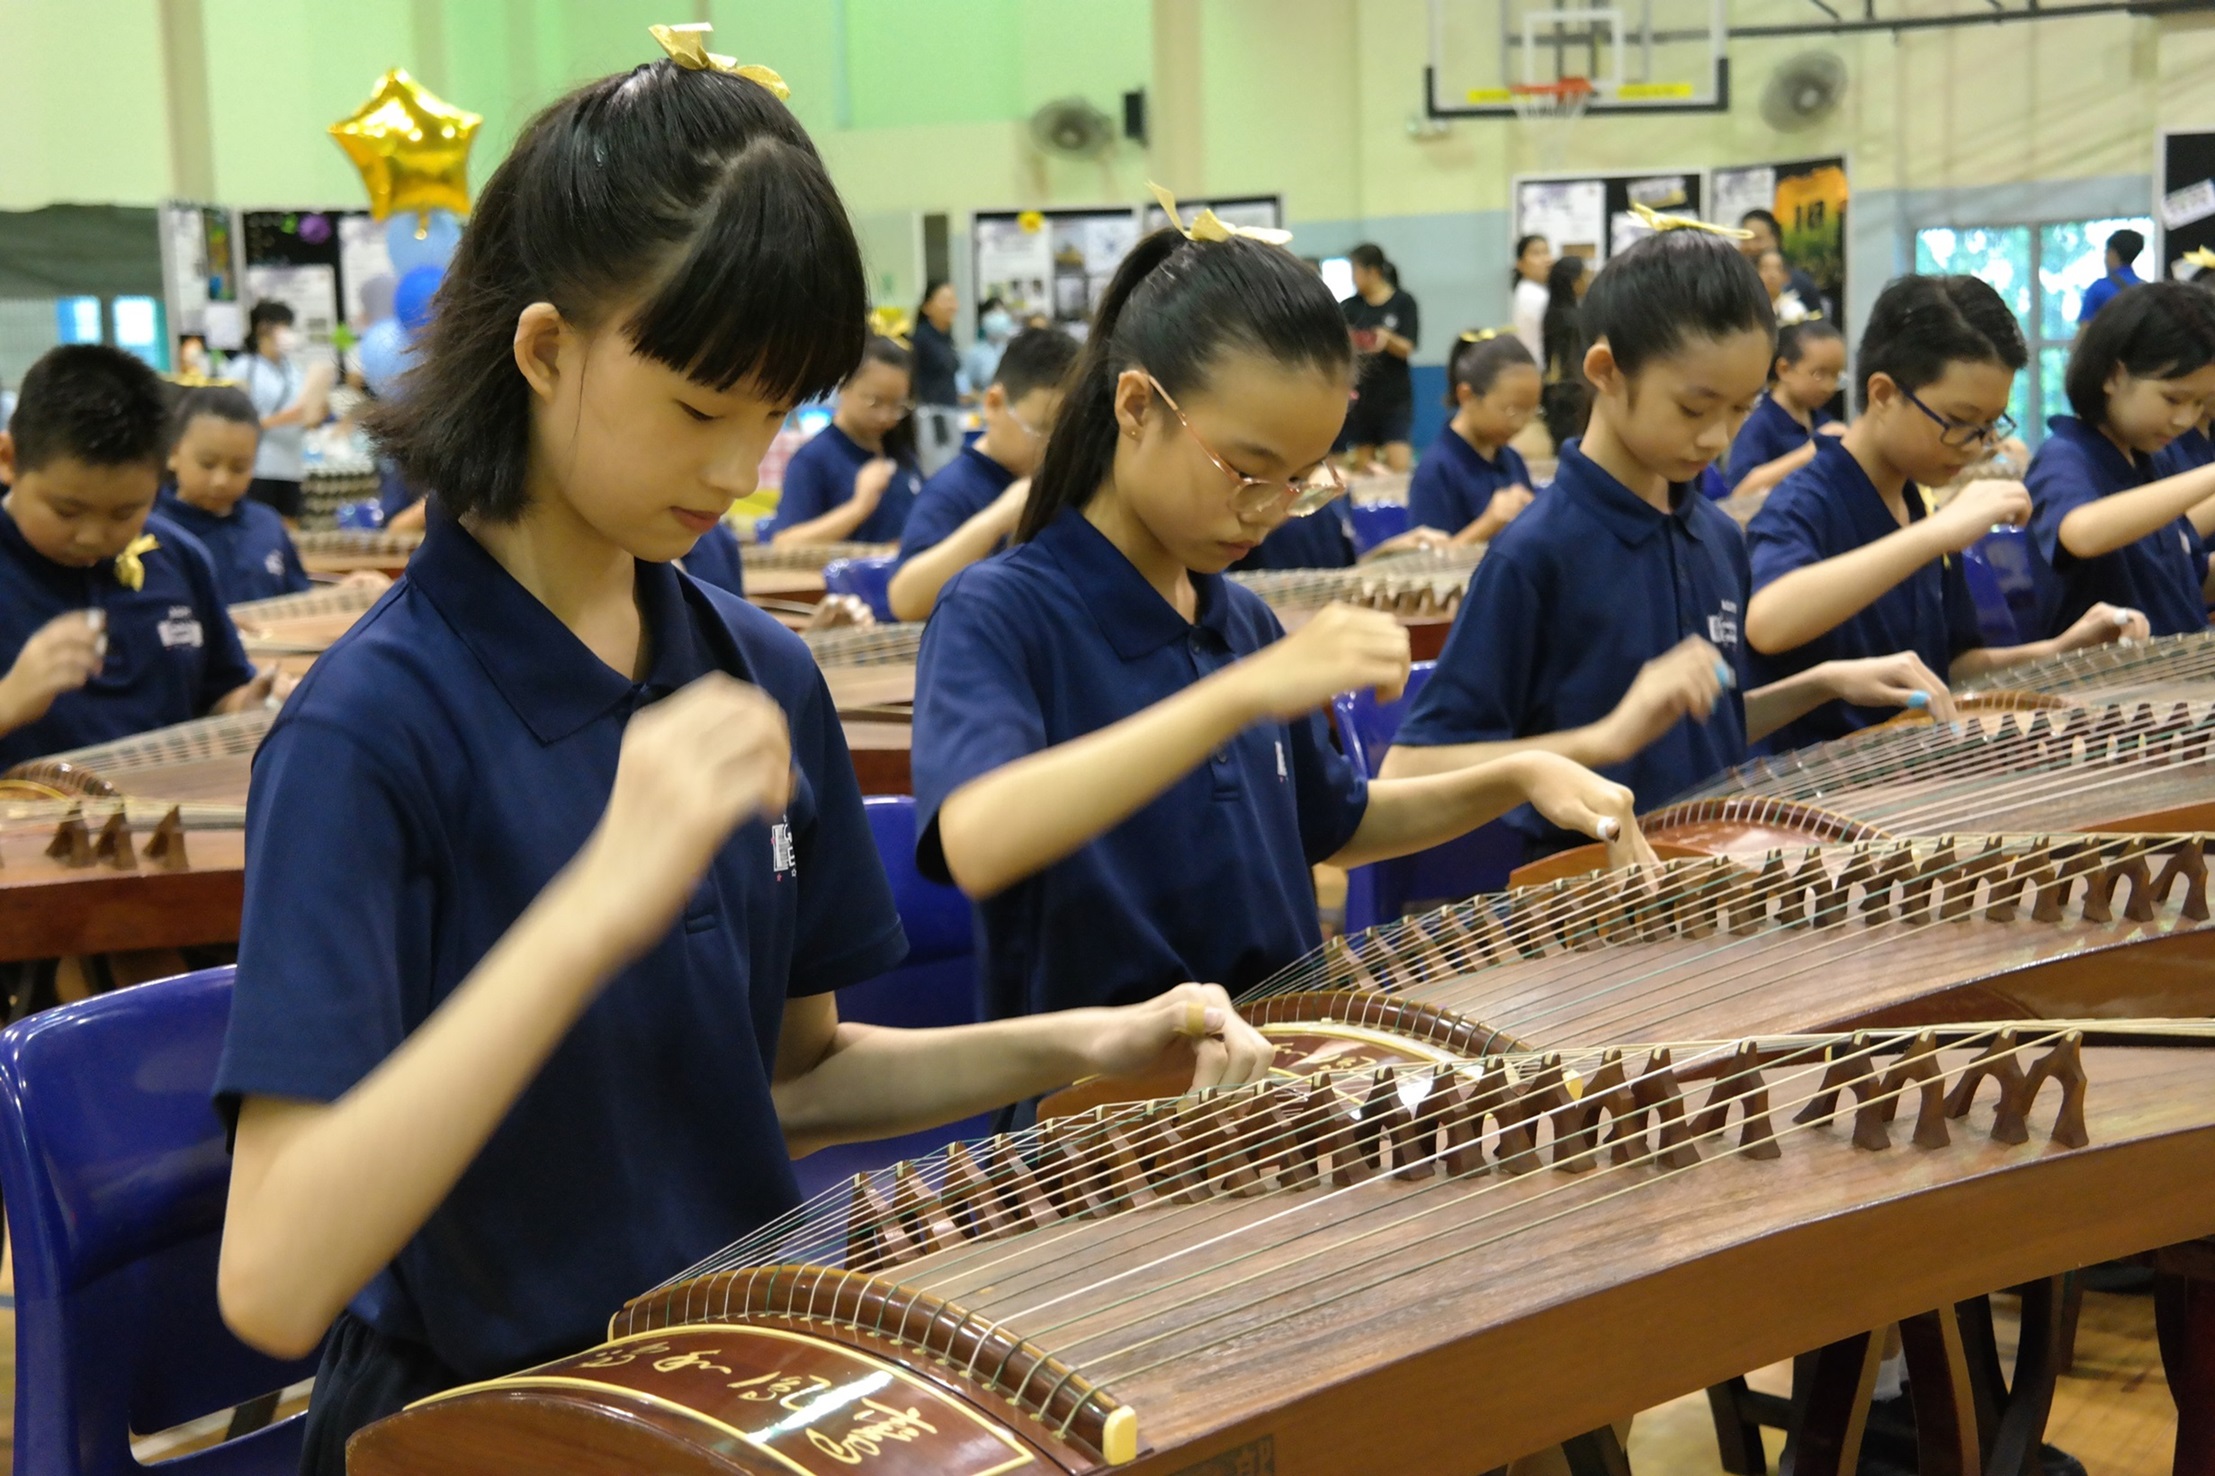 Captivating performance by Guzheng members.